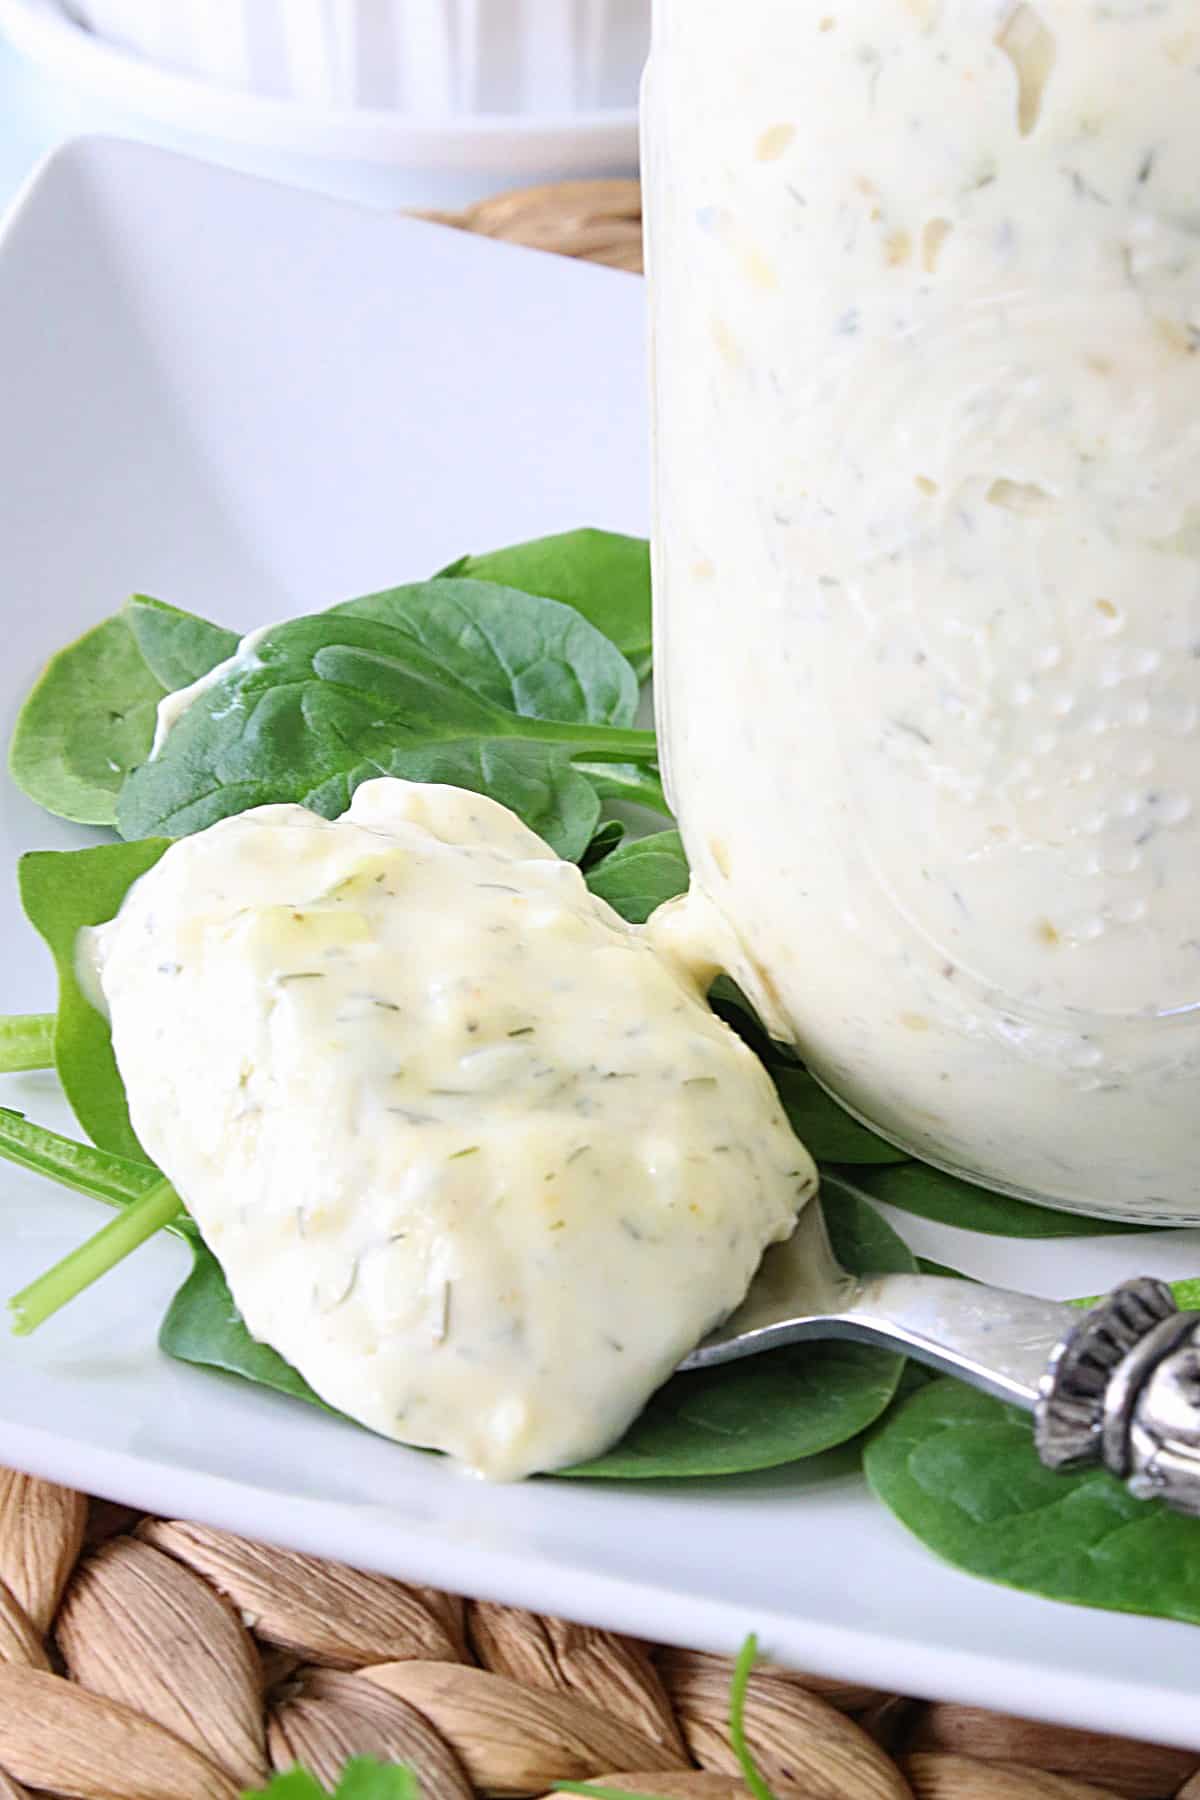 A spoon loaded with a large dollop of Homemade Dill Tartar Sauce on a white plate.